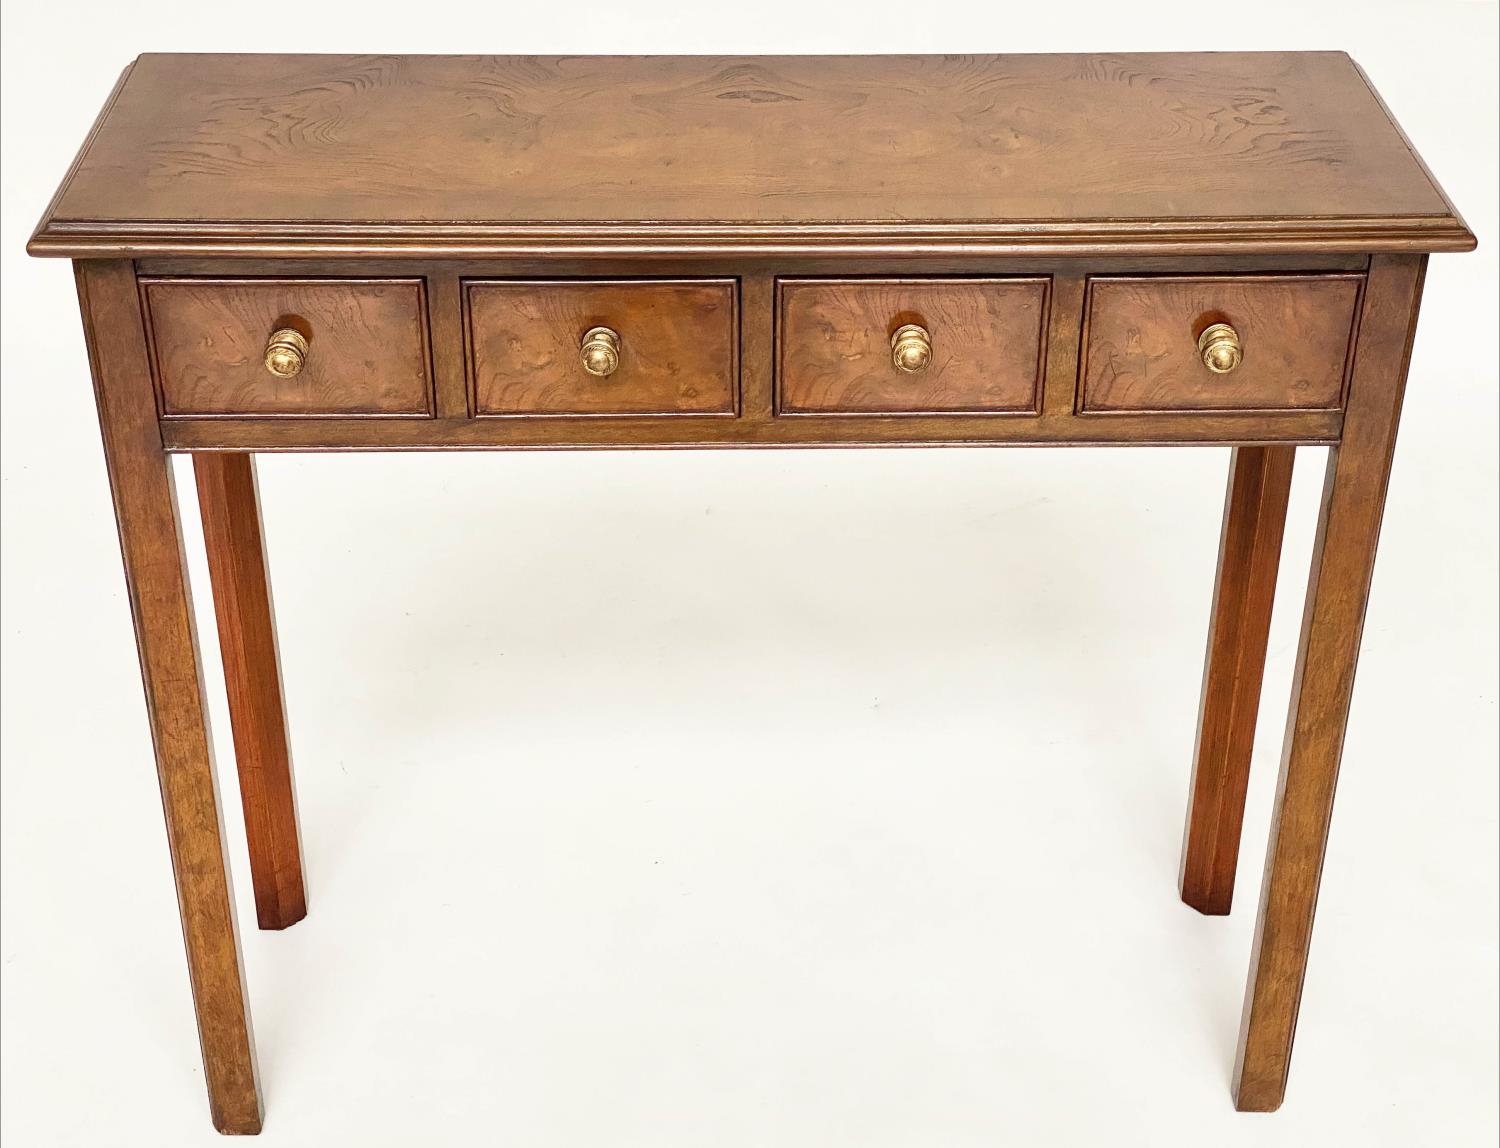 HALL TABLE, George III design burr walnut and crossbanded with four frieze drawers and inner - Image 6 of 11